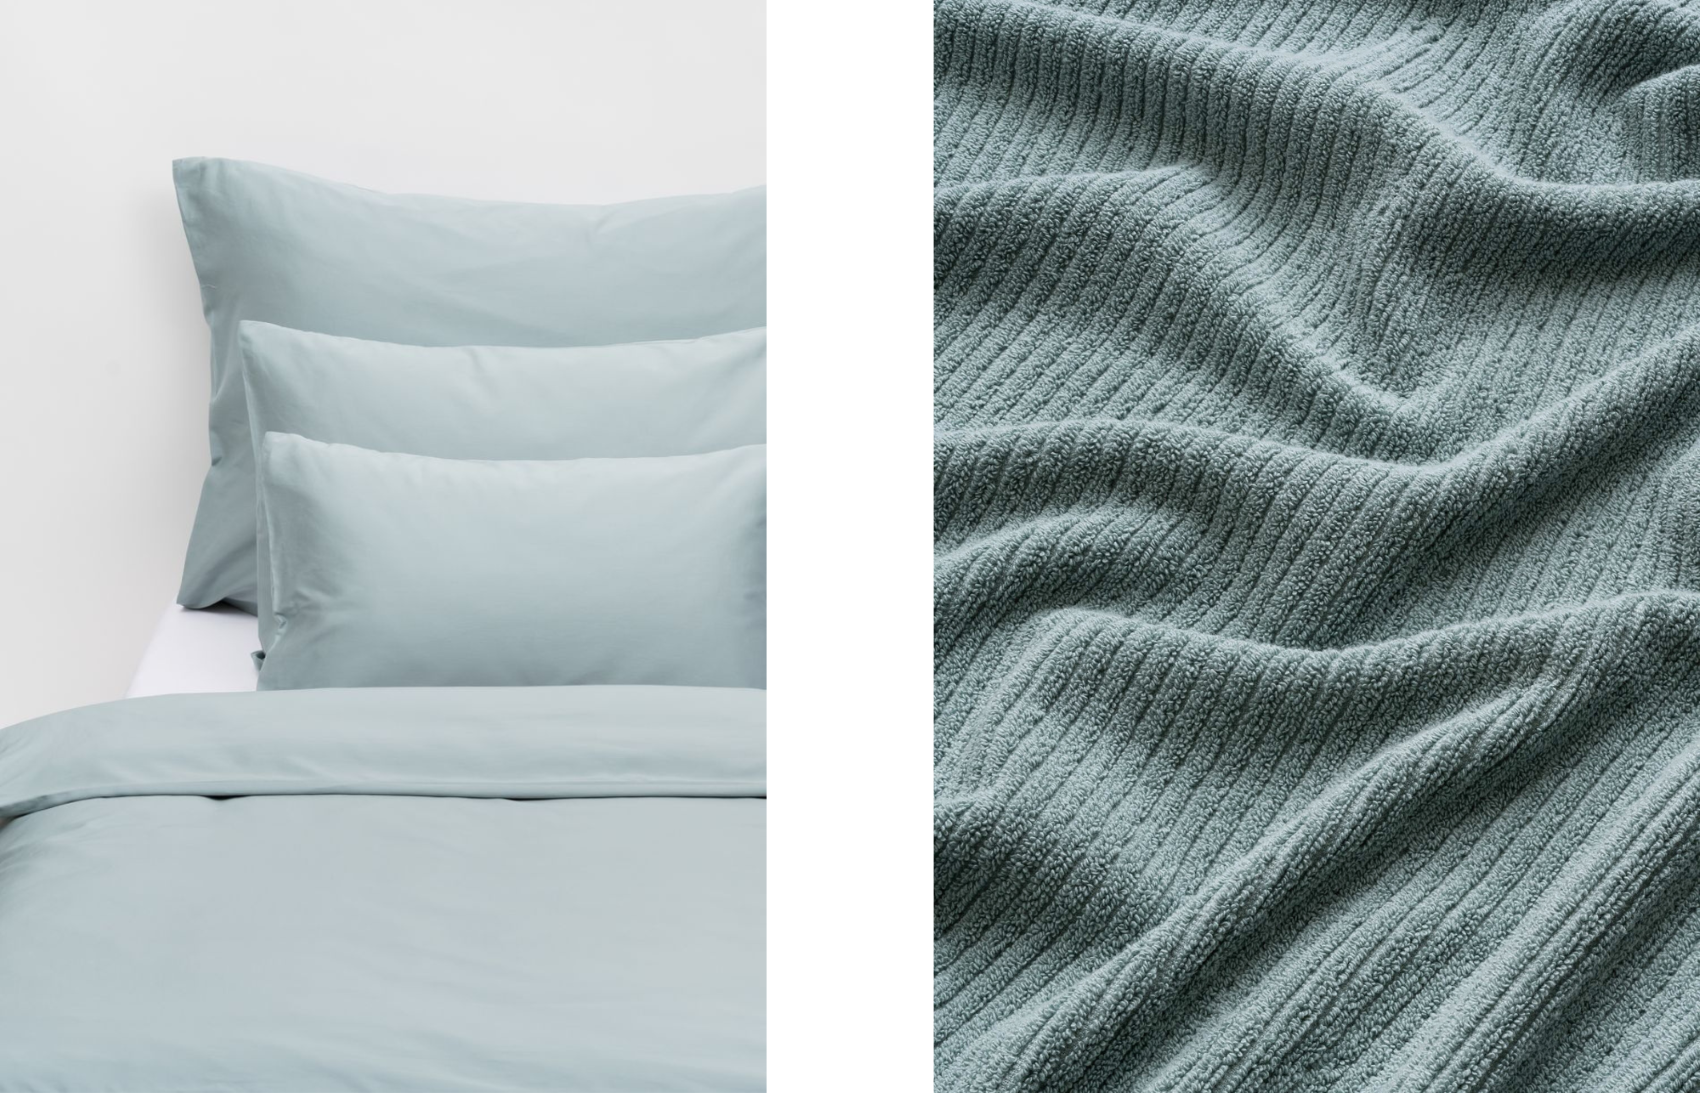 Our light blue Playful Cotton towel and Afternoon Storm sheets both feature the Pantone shade 15-4706 TPG.